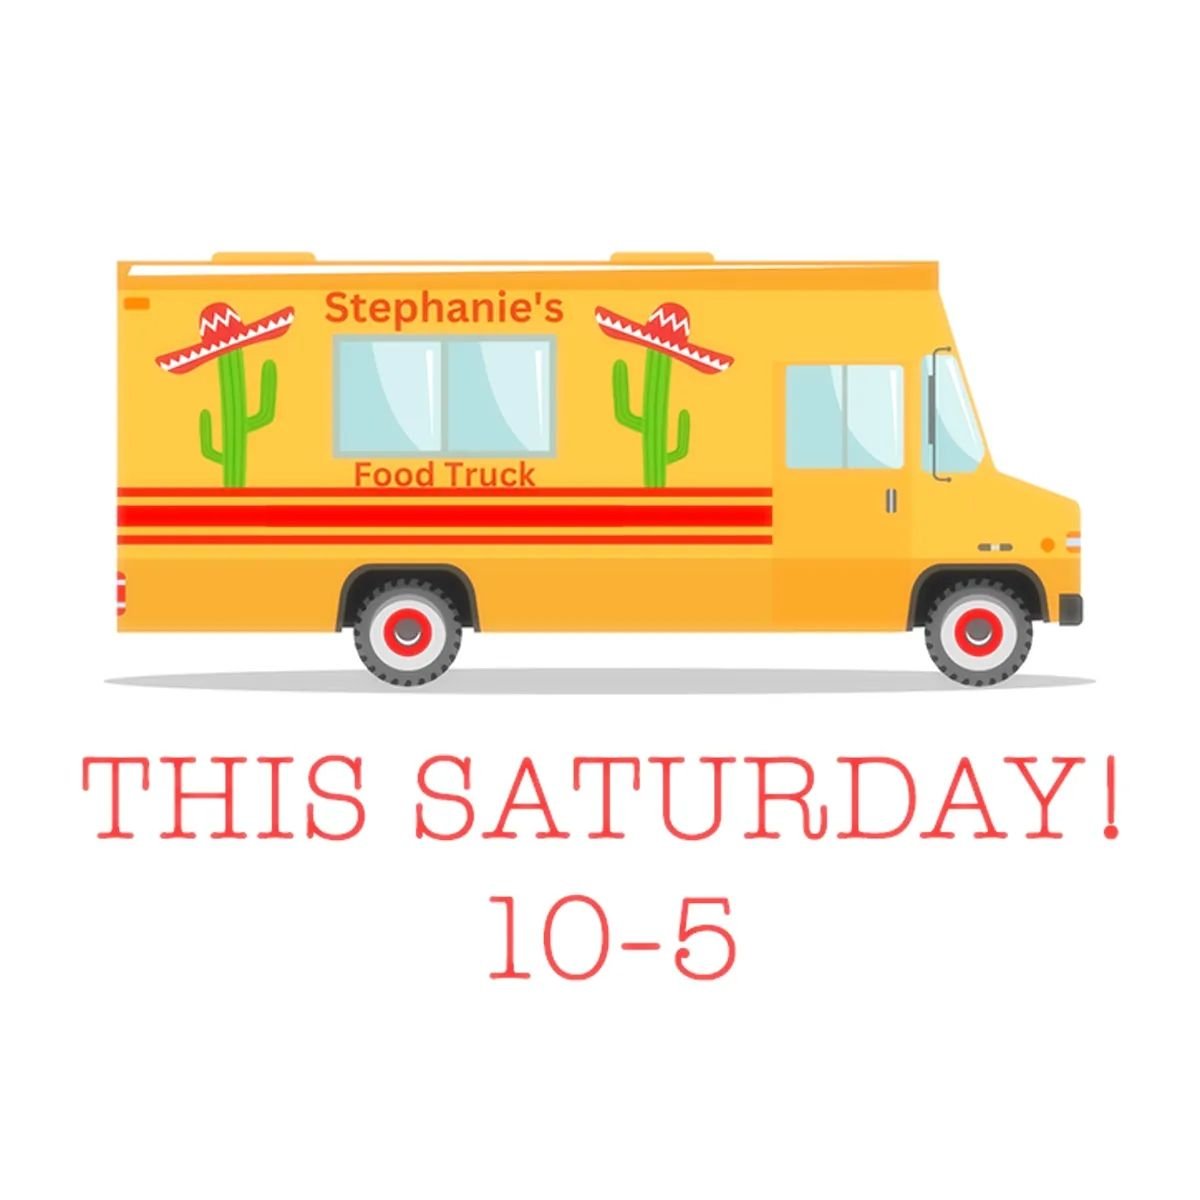 Stephanie's food truck will be there this weekend for our makers market serving up Mexican, American, and Greek foods for your delight 🤤
.
.
.
#foodtrucks #makersmarket #chapelhill #ncmakersmarket #greekfood #americanfood #mexicanfood #yum